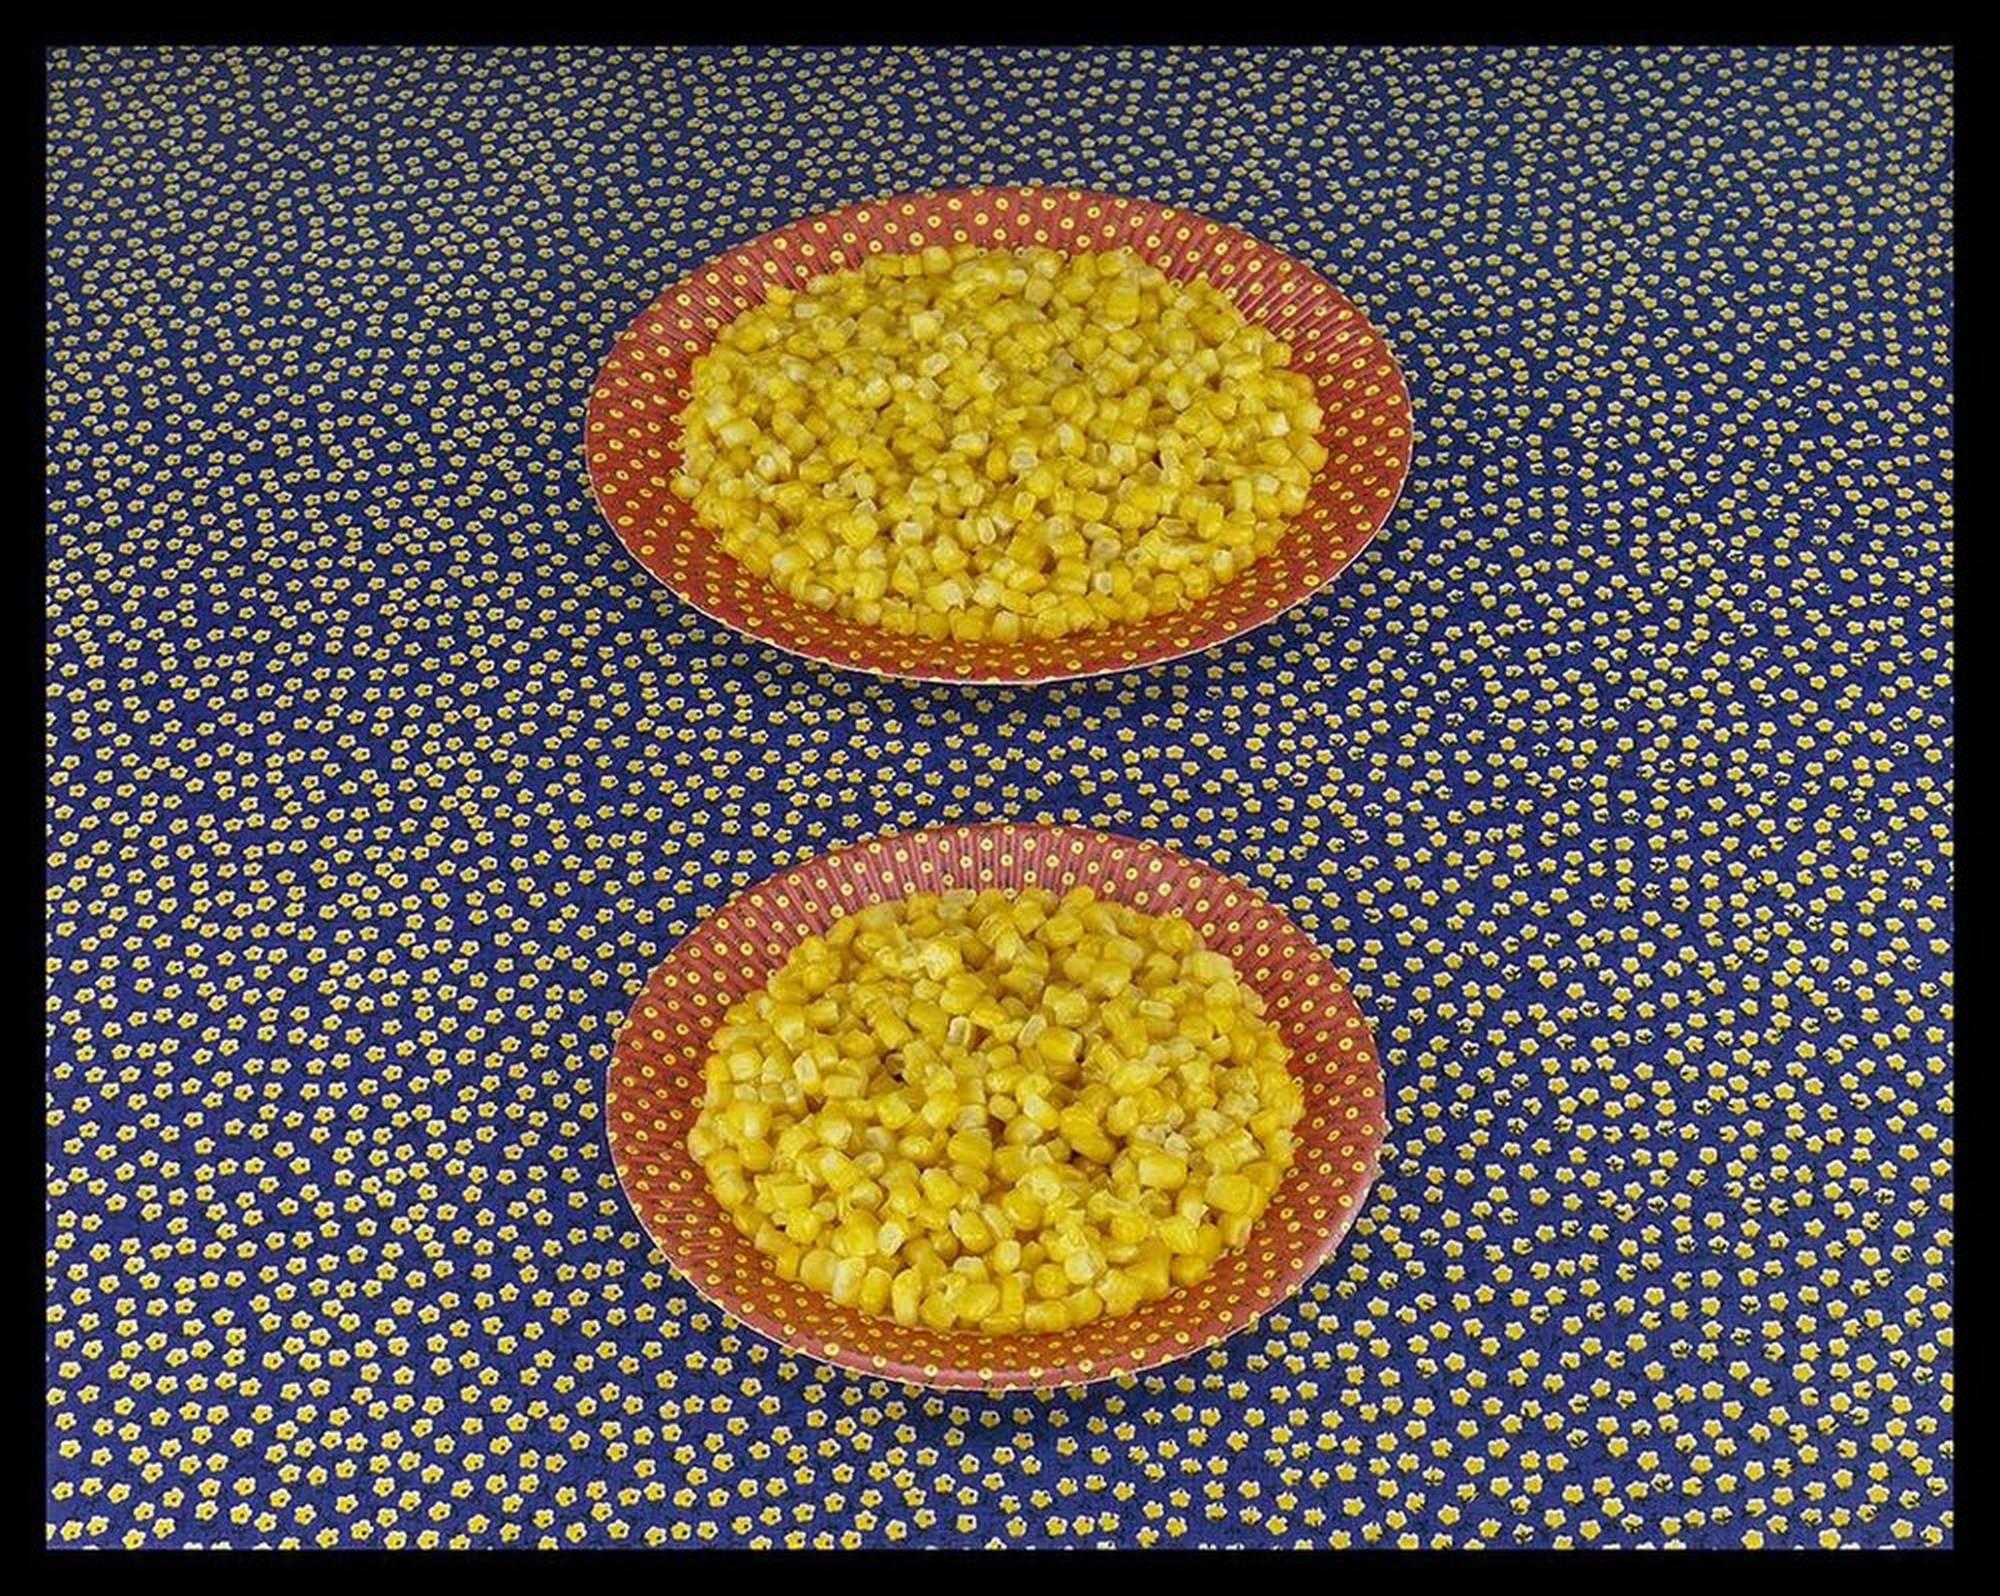 Sandy Skoglund Color Photograph - Two Plates of Corn